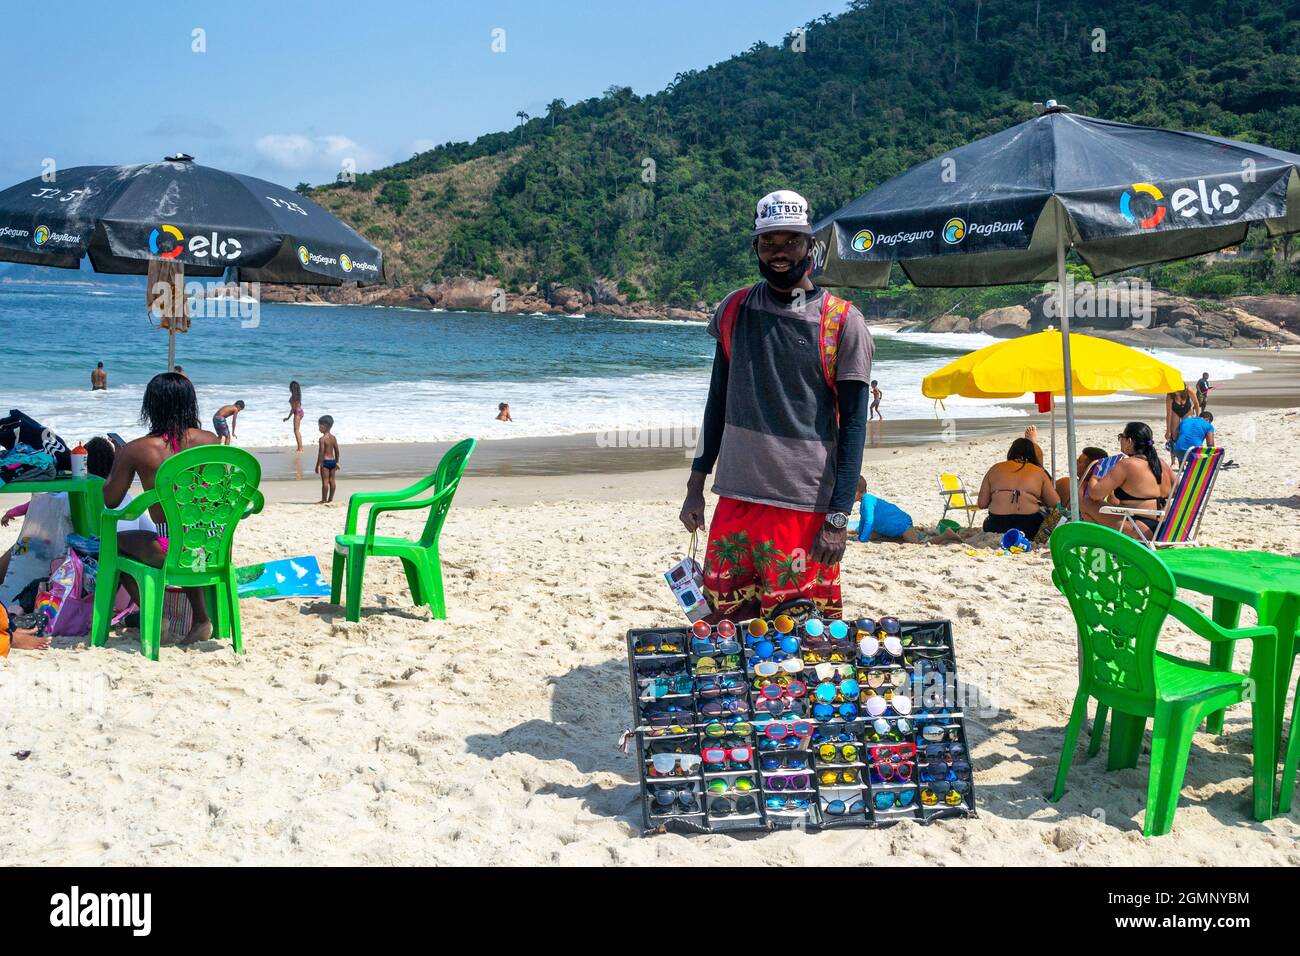 A Brazilian man selling sunglasses in the Piratininga beach in Rio de Janeiro, Brazil. With a beautiful landscape, this famous place is a major touris Stock Photo